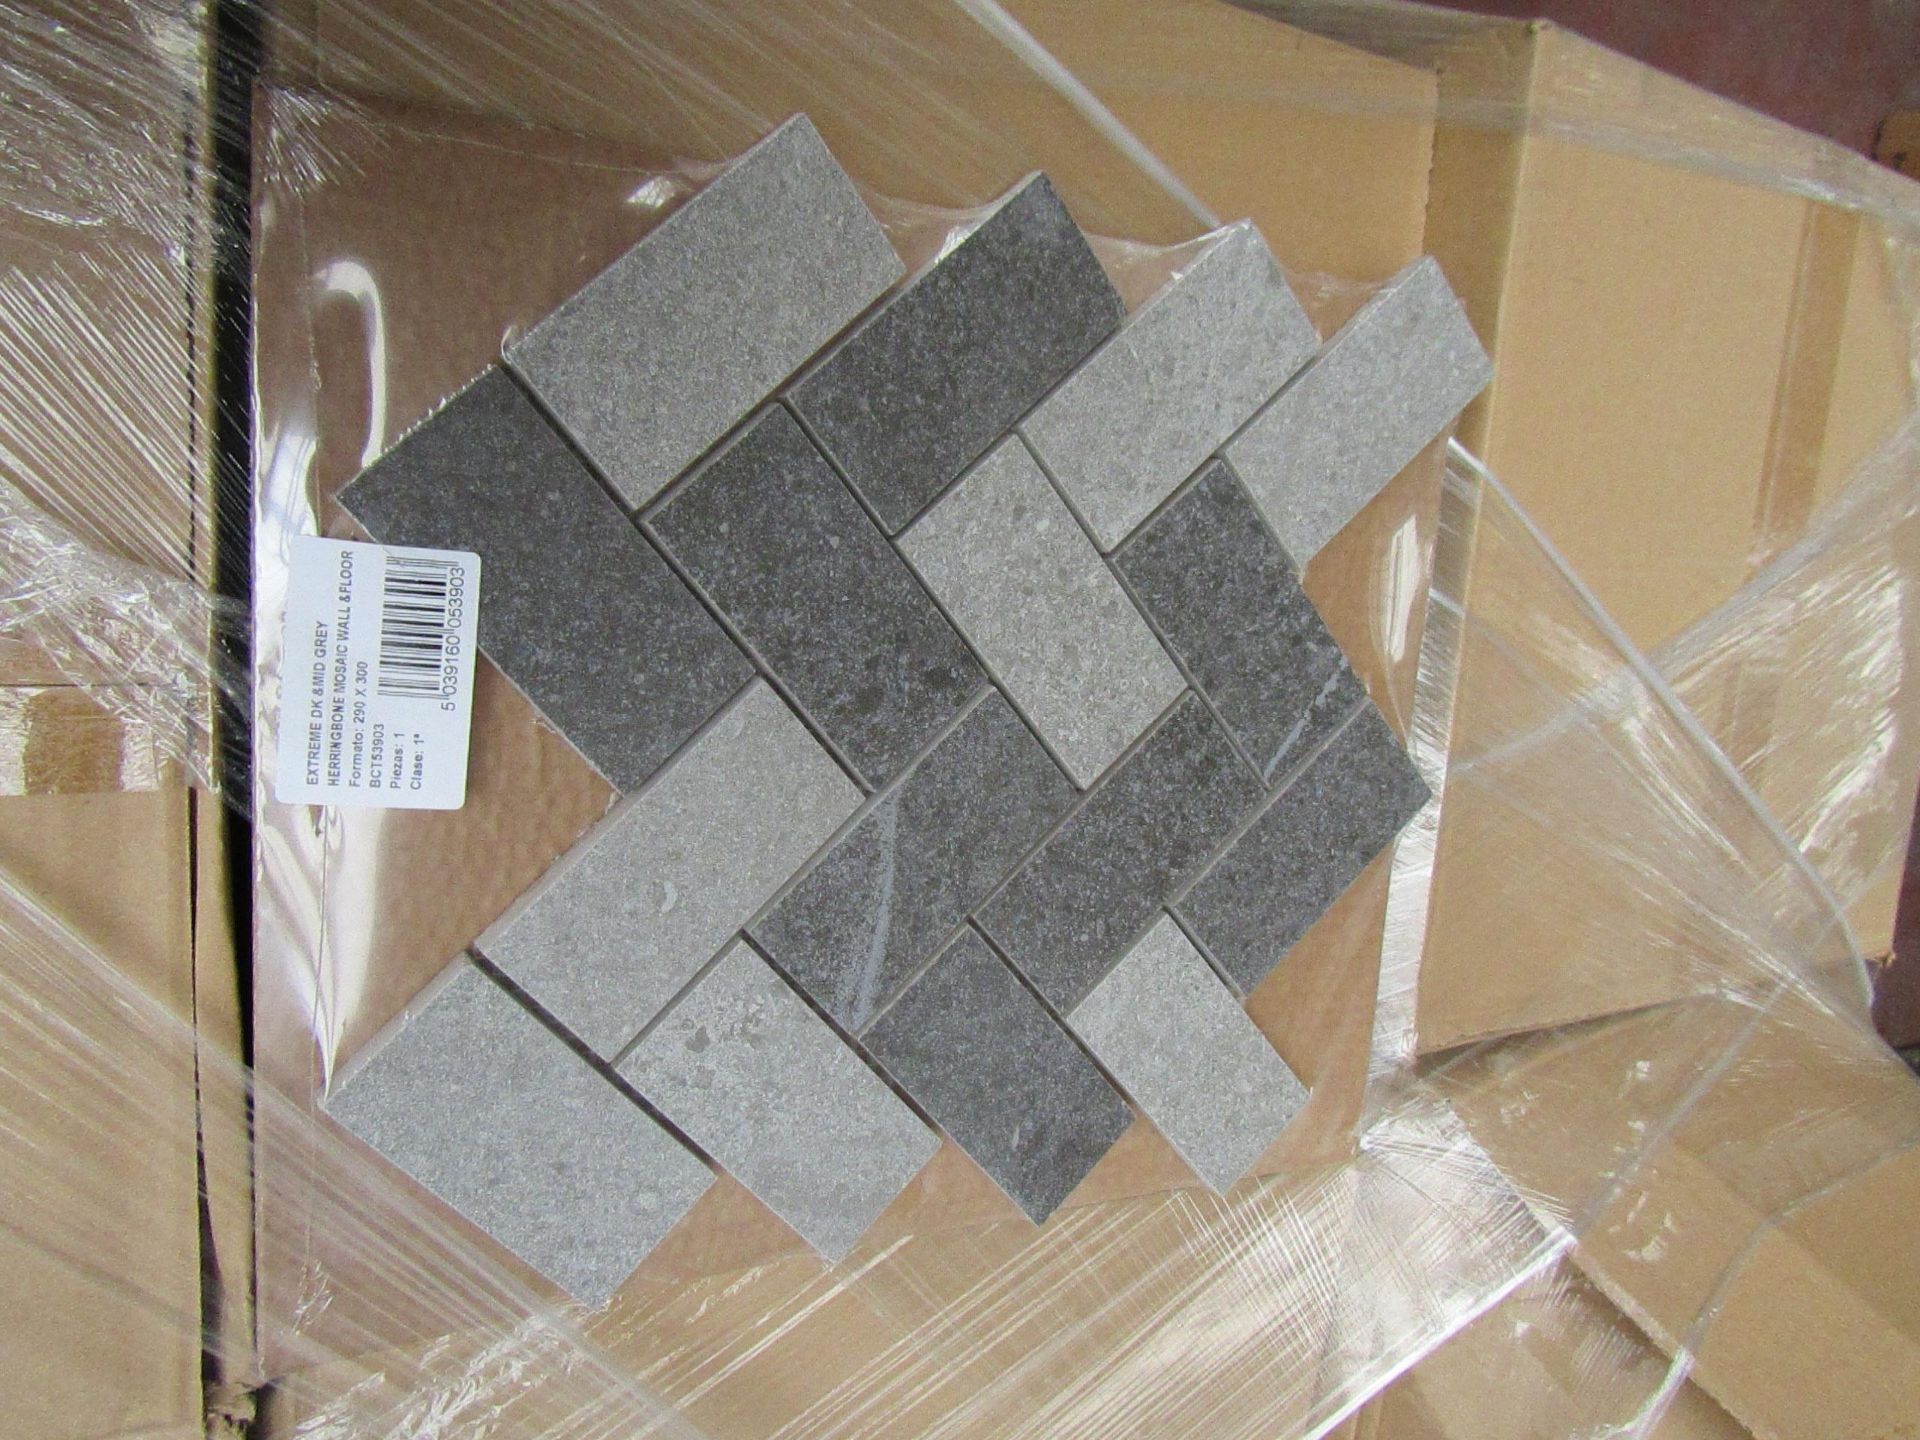 7x Boxes of 7, 300x290mm Artemis Herringbone Mosaic Tiles, new, RRP £16 a Tile giving a total lot